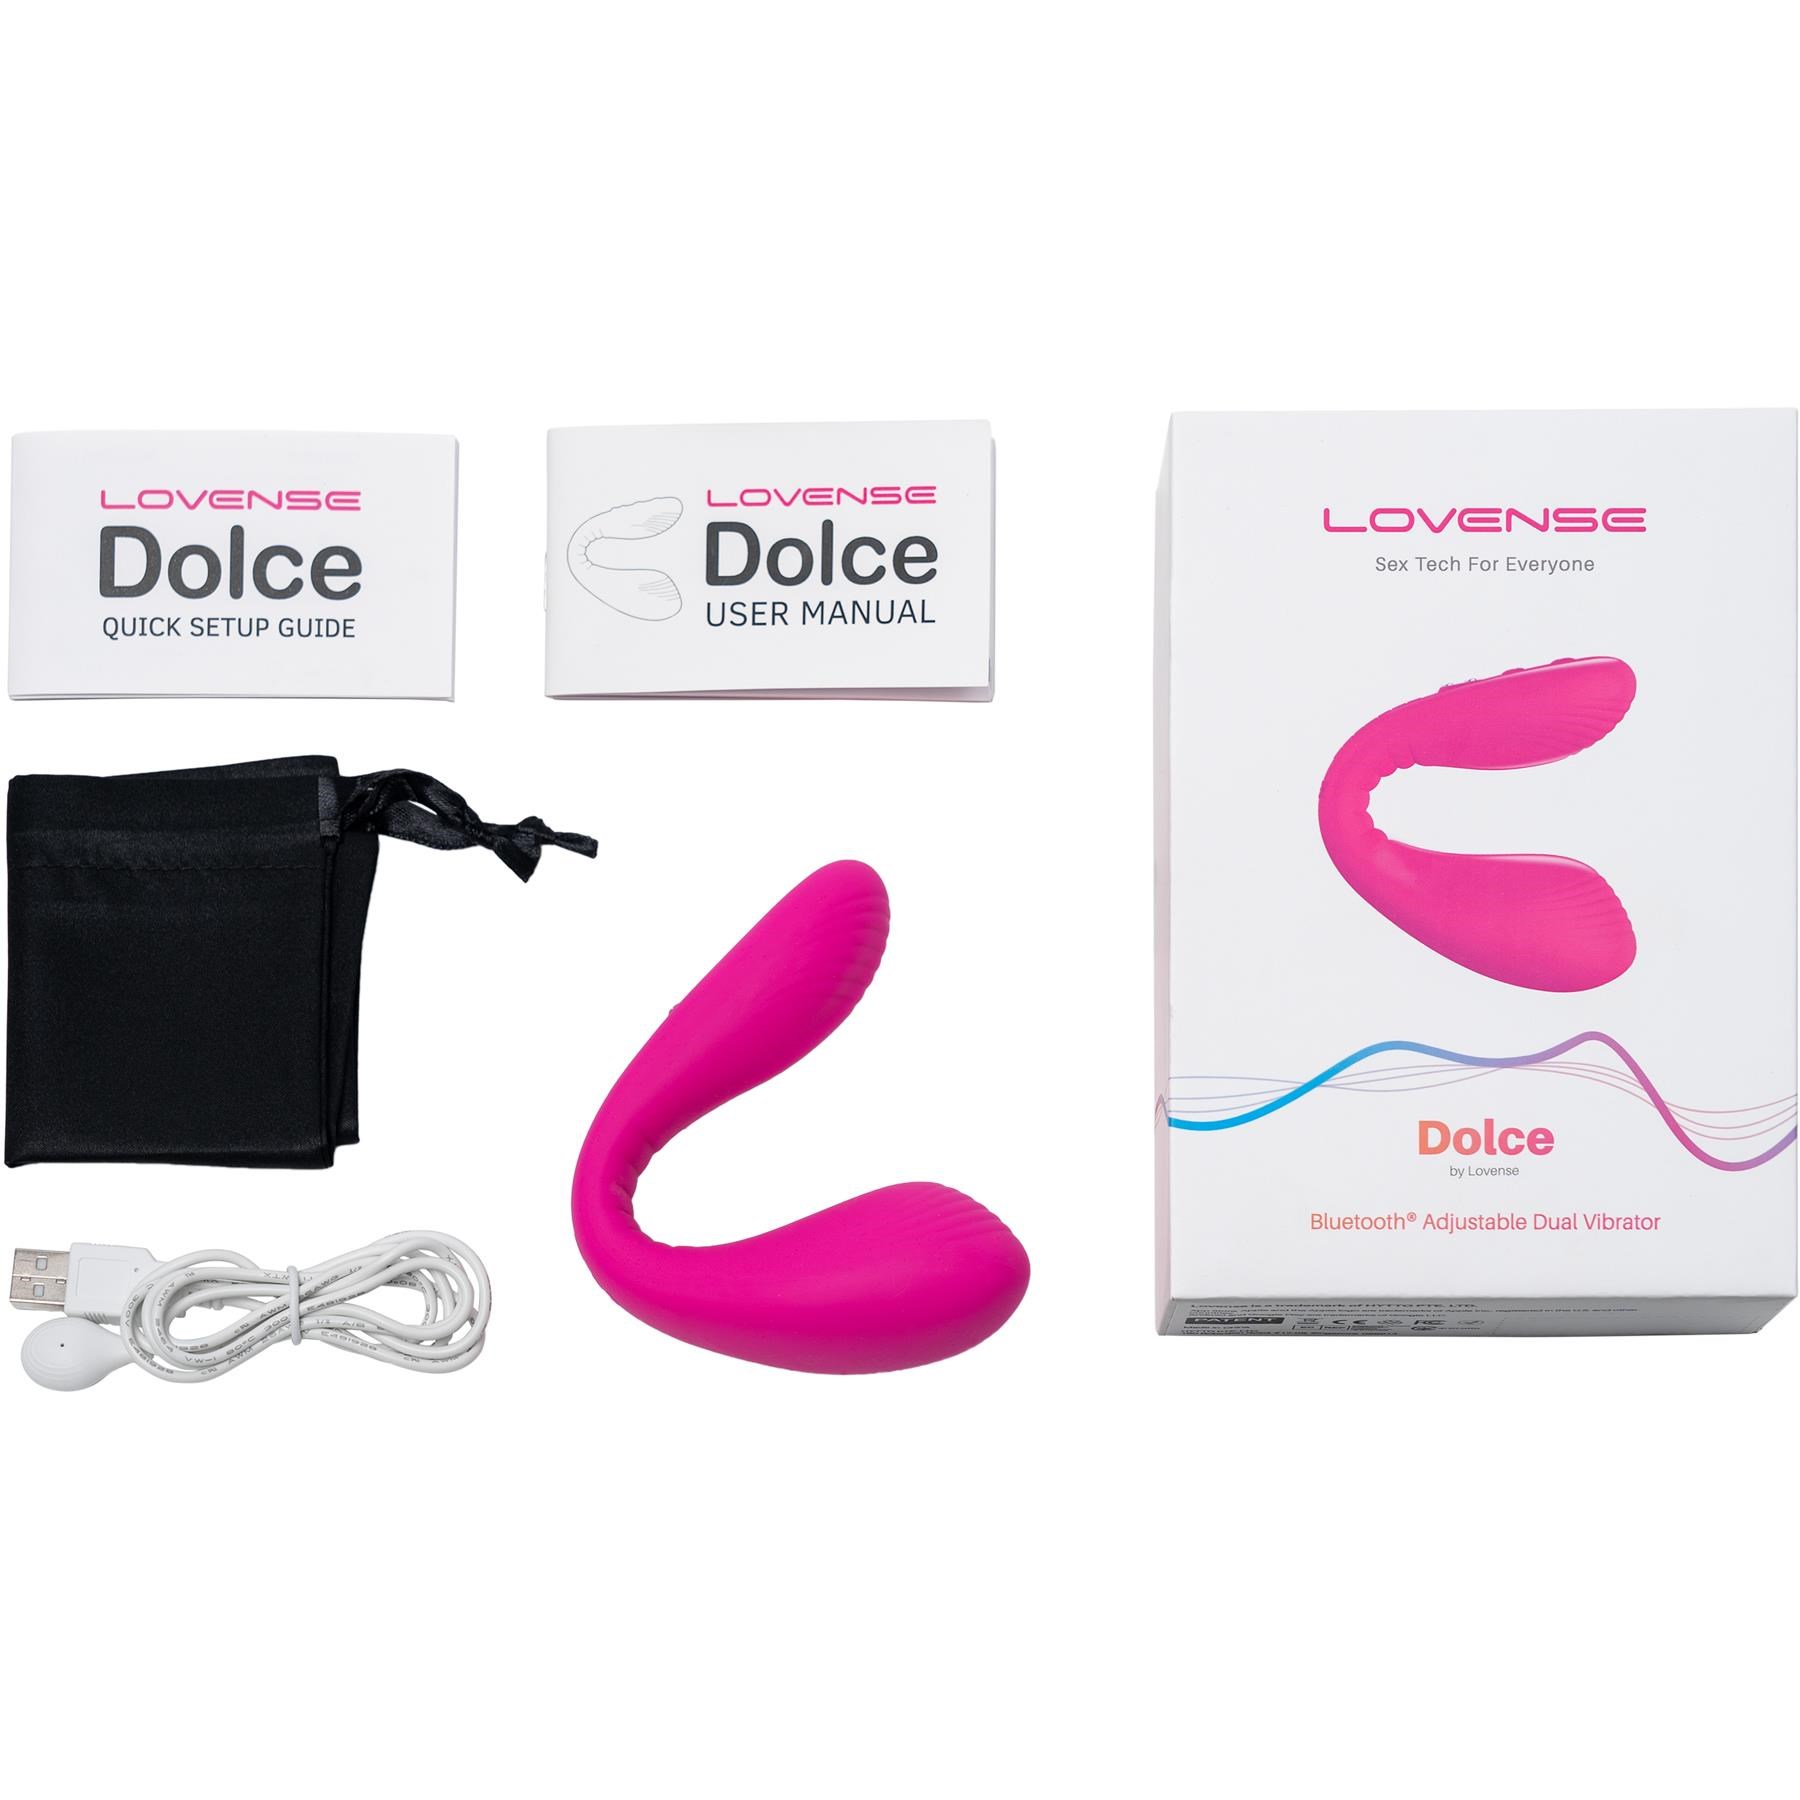 Lovense Dolce Bluetooth Dual Vibrator - All Components